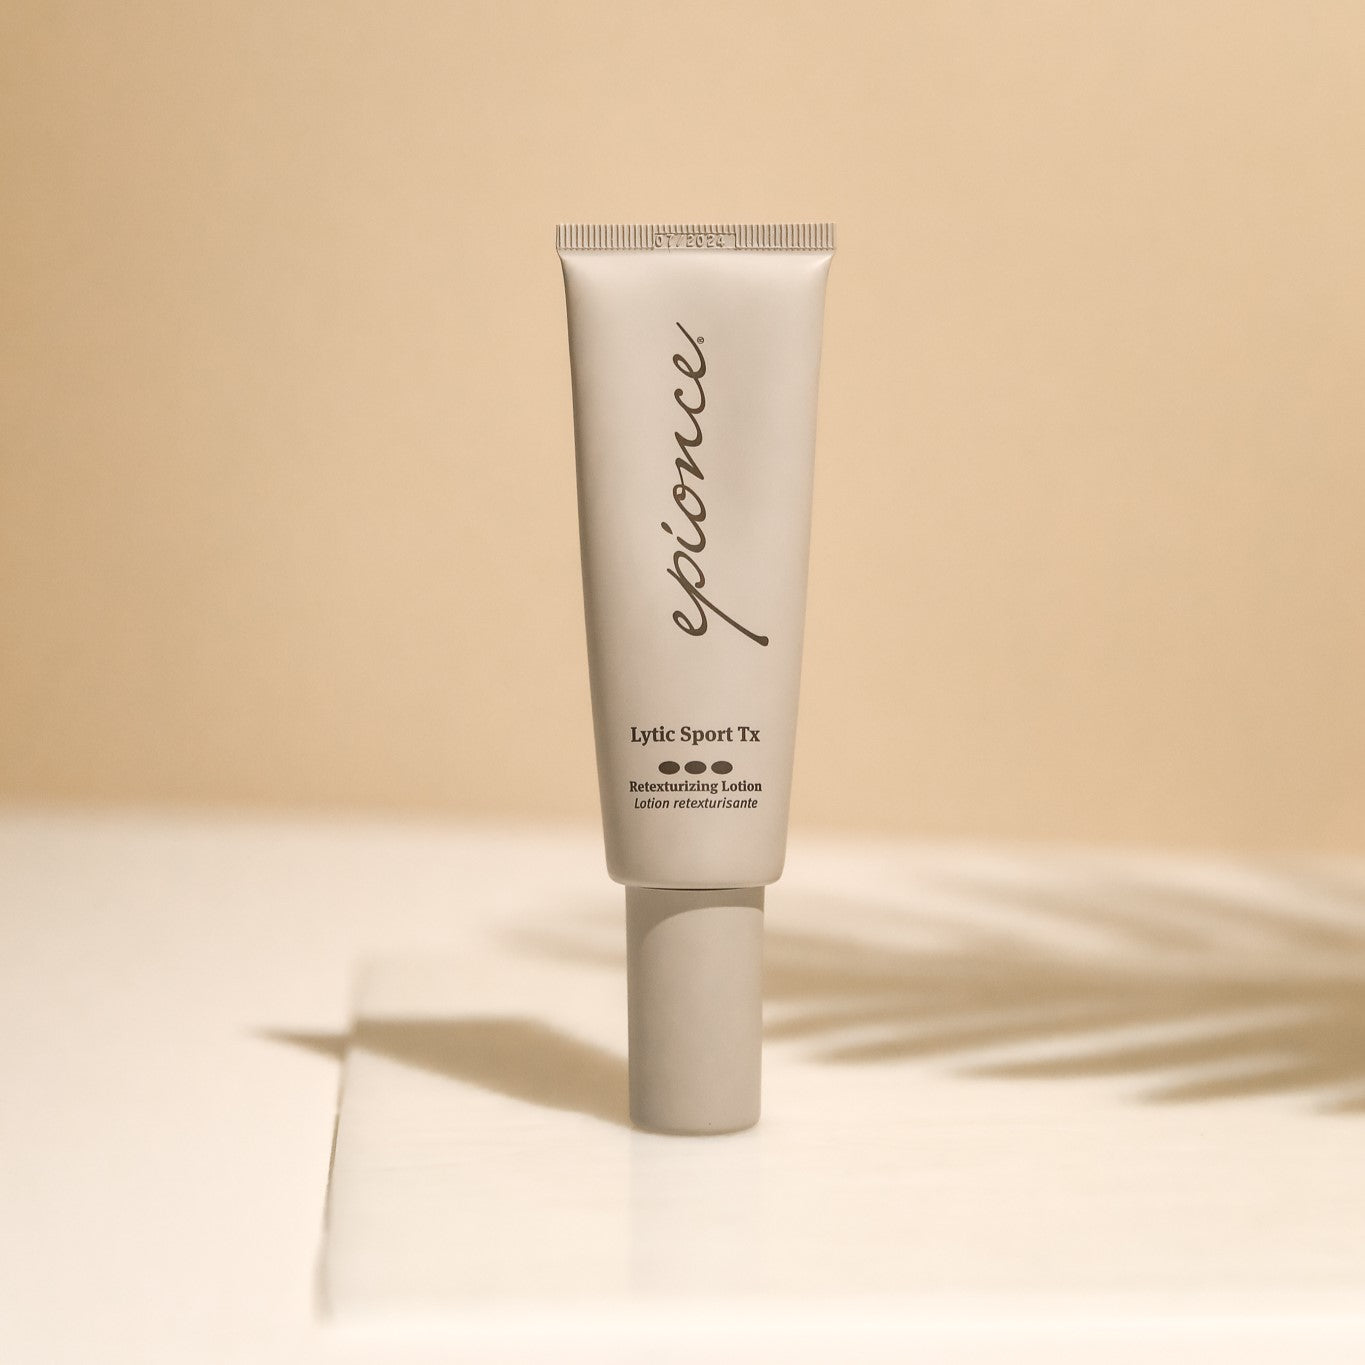 Epionce Lytic Sport Tx reduces redness and smooths skin texture.